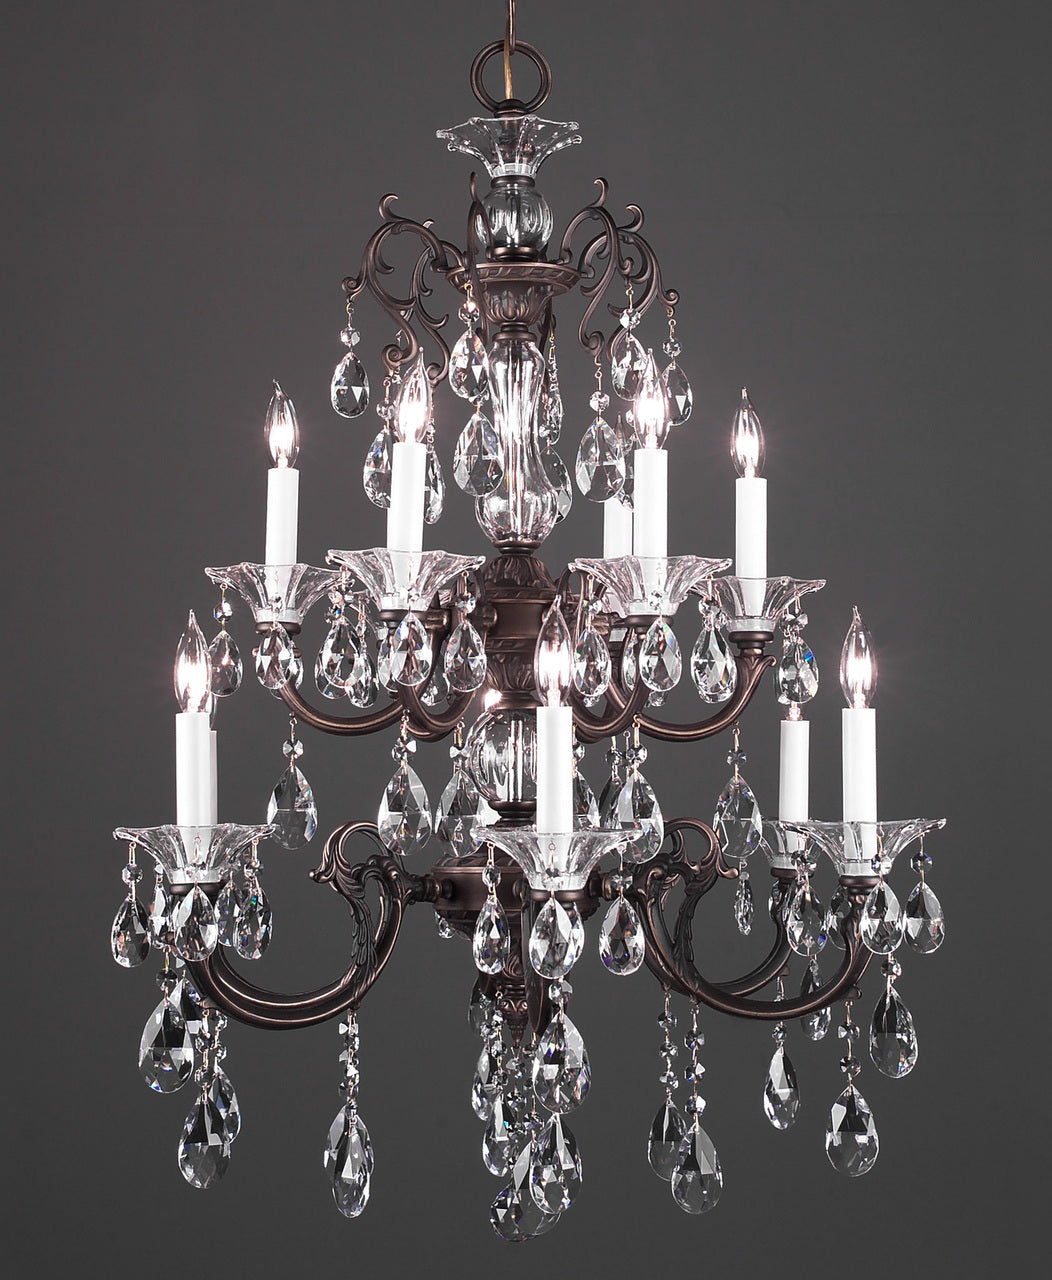 Classic Lighting 57062 RB SC Via Lombardi Crystal Chandelier in Roman Bronze (Imported from Spain)